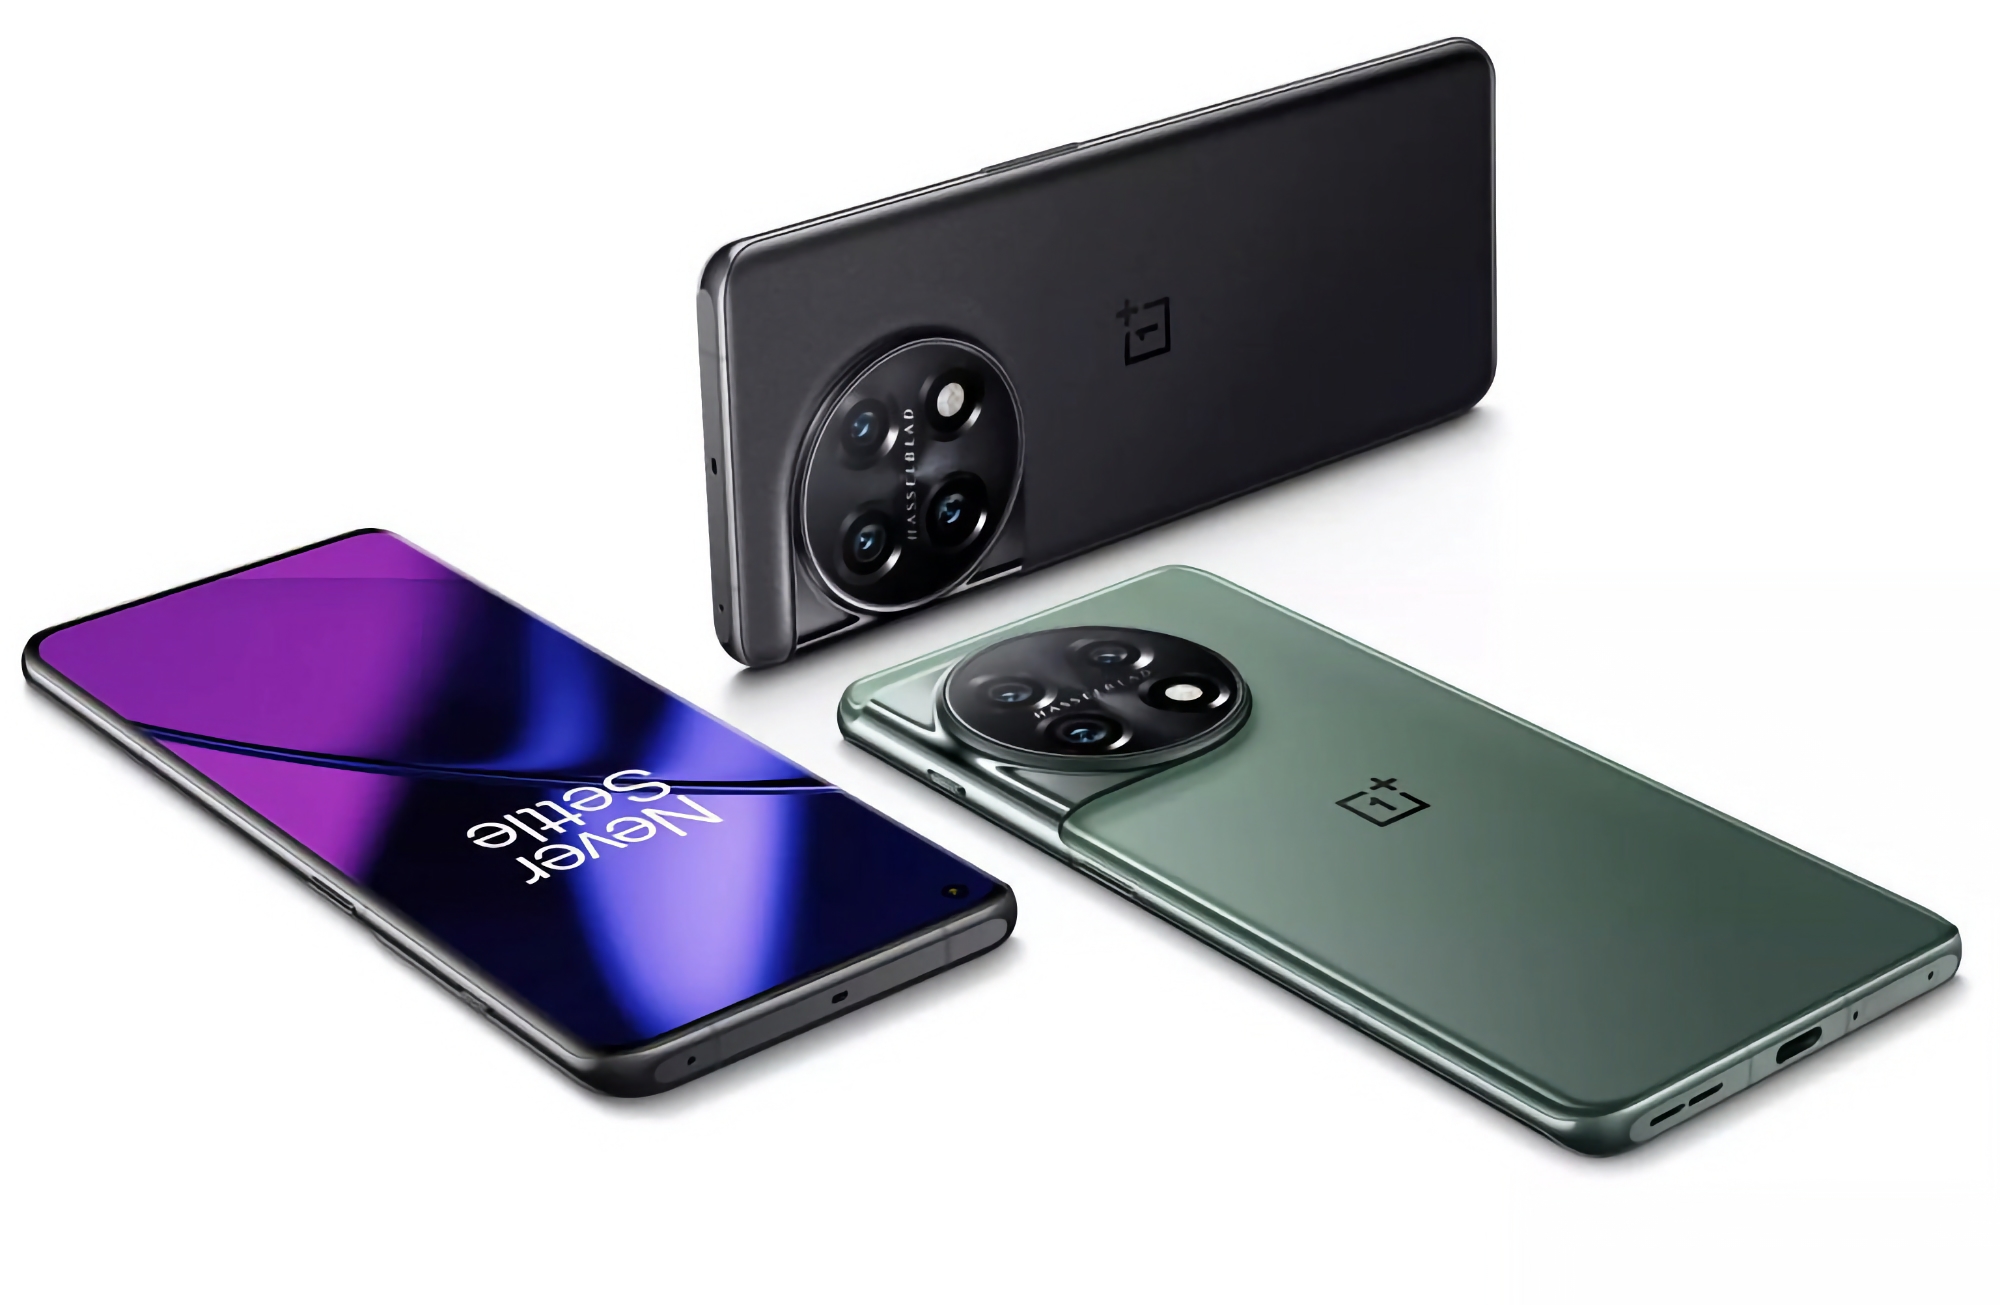 OnePlus 11: LTPO 3.0 AMOLED display at 120 Hz, Snapdragon 8 Gen 2 chip, 100W charging, Hasselblad camera and price from $580